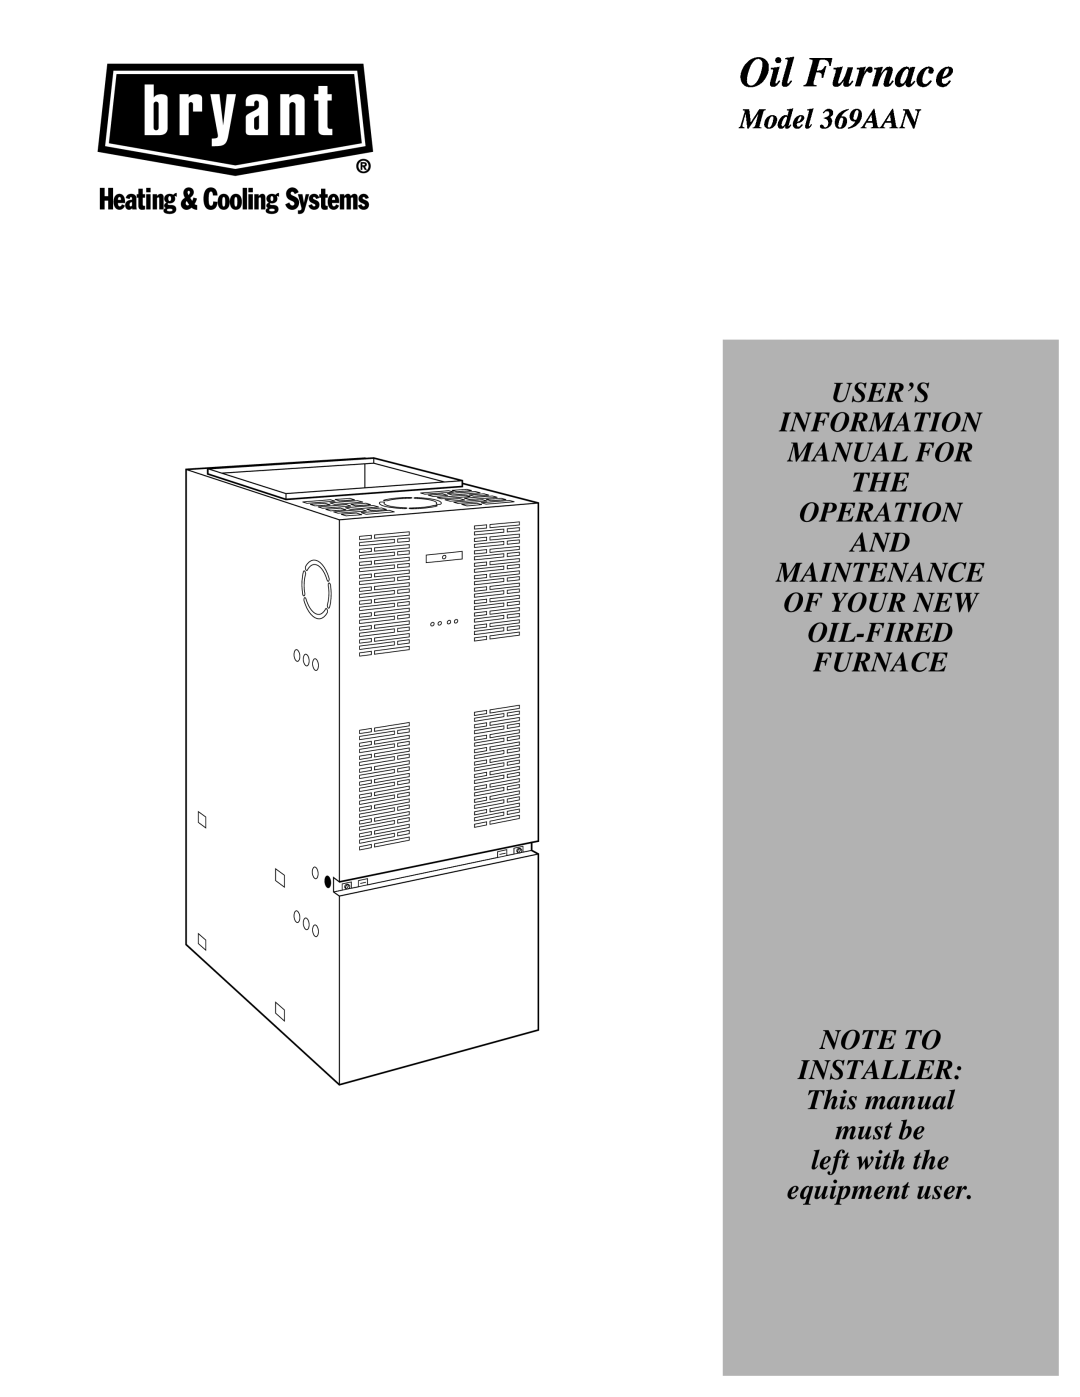 Bryant manual Oil Furnace, Model 369AAN USER’S, NOTE TO INSTALLER This manual must be, left with the equipment user 